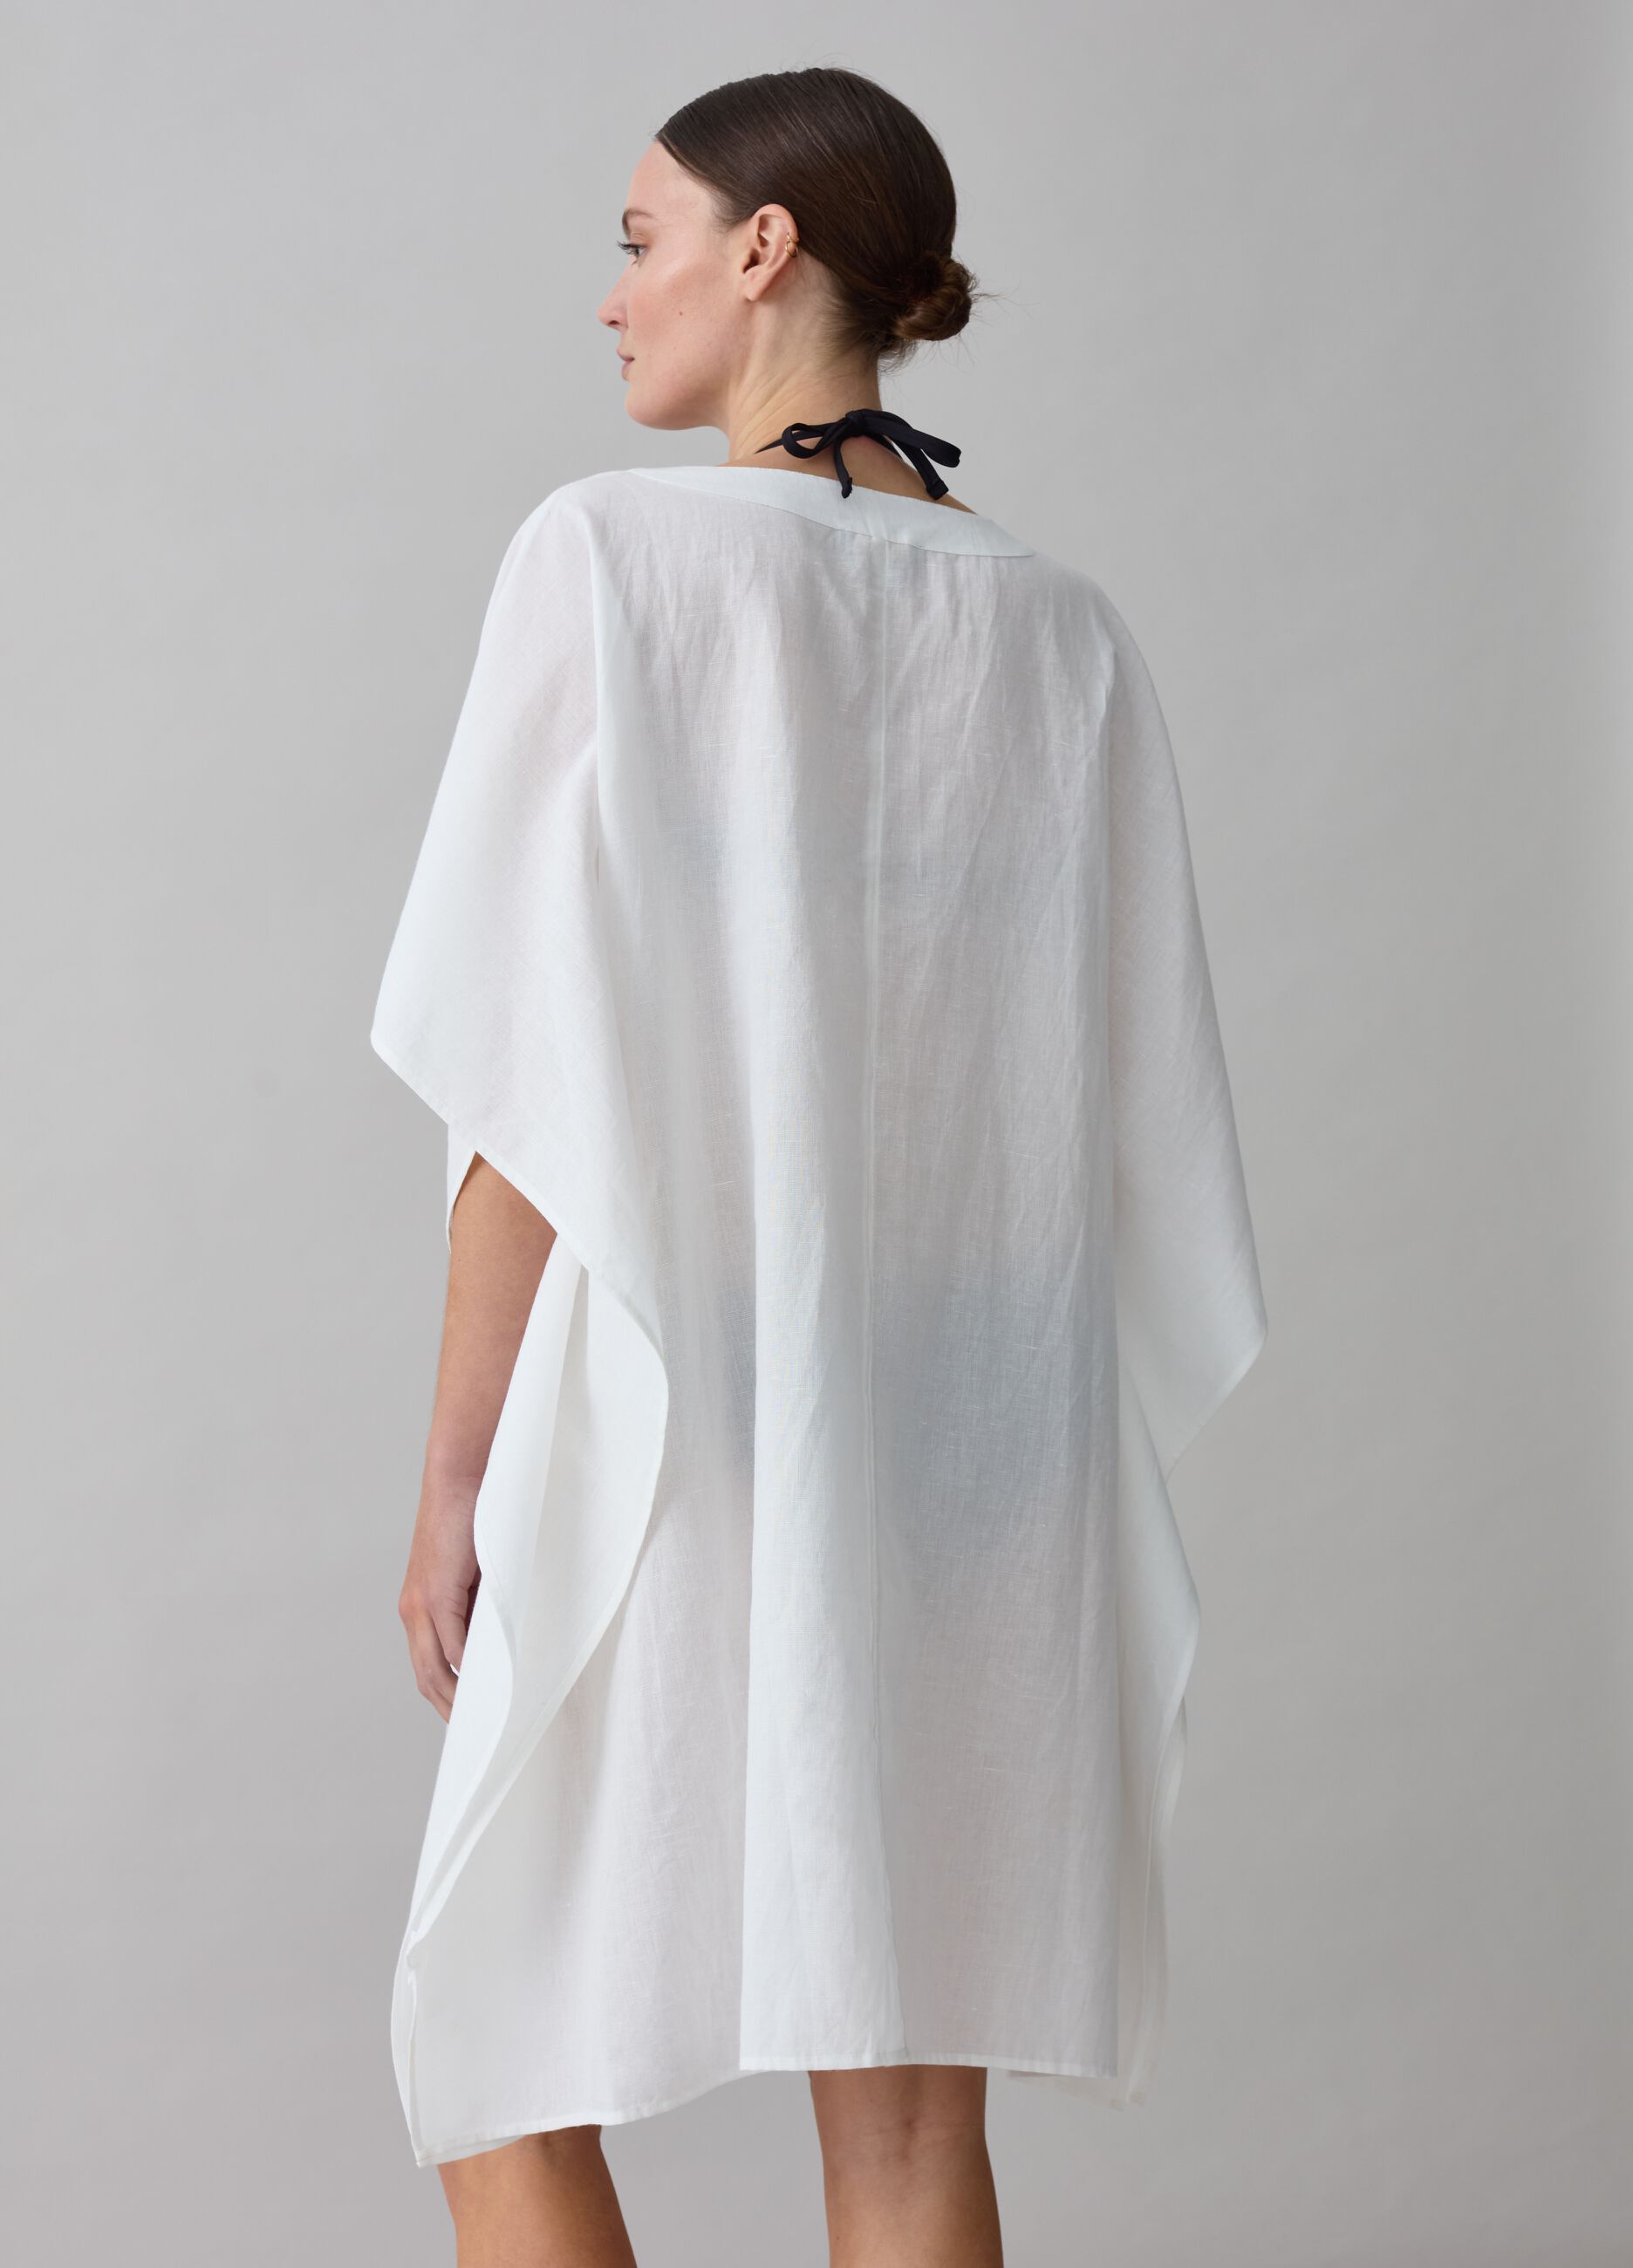 Beach cover-up poncho with pockets